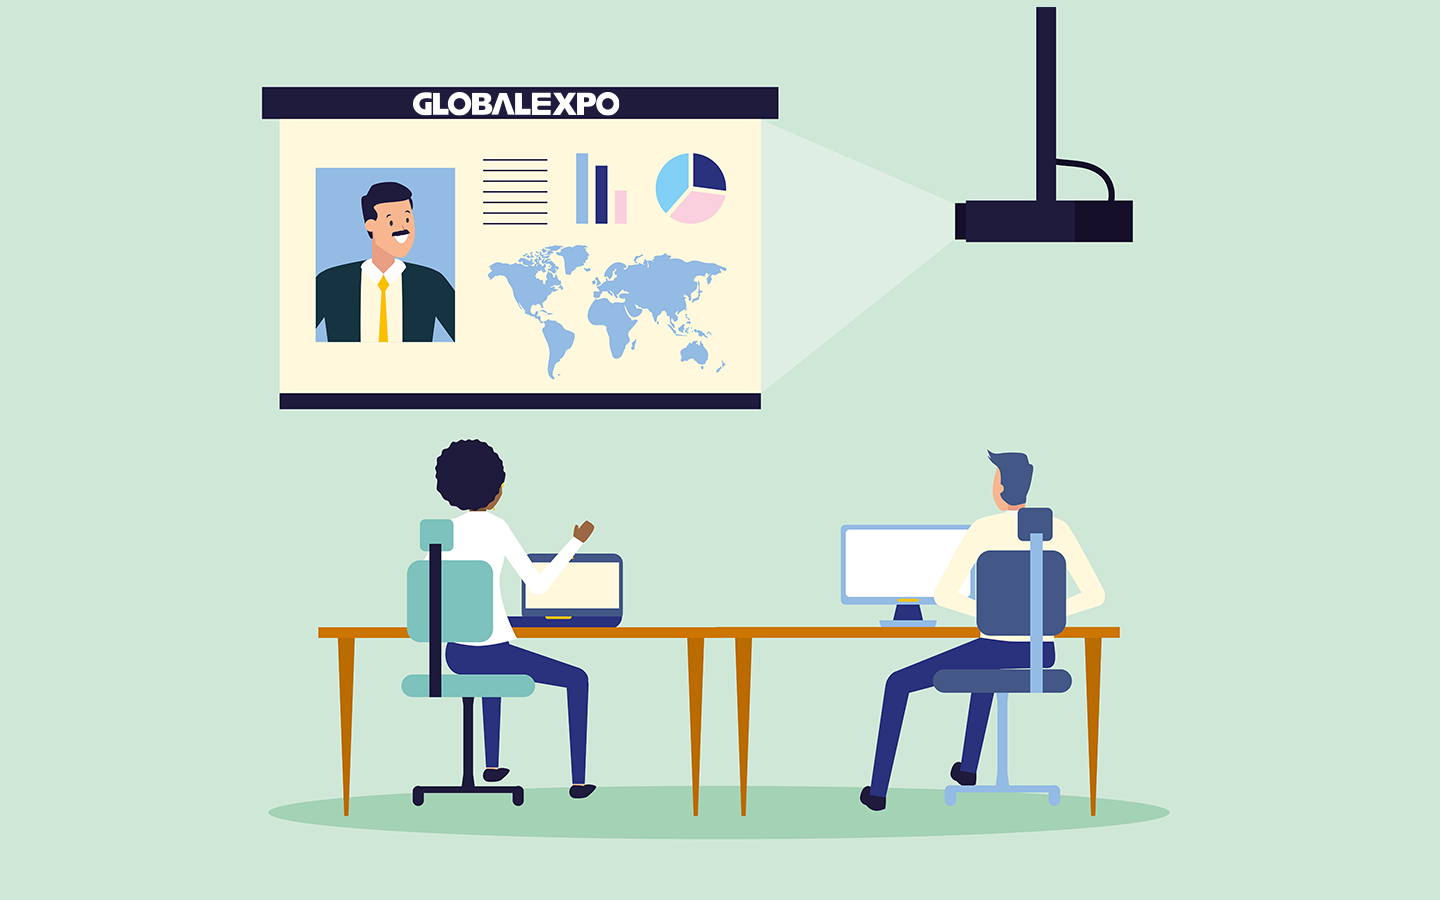 GLOBALEXPO: Online exhibitions, video calls and conferences in one place